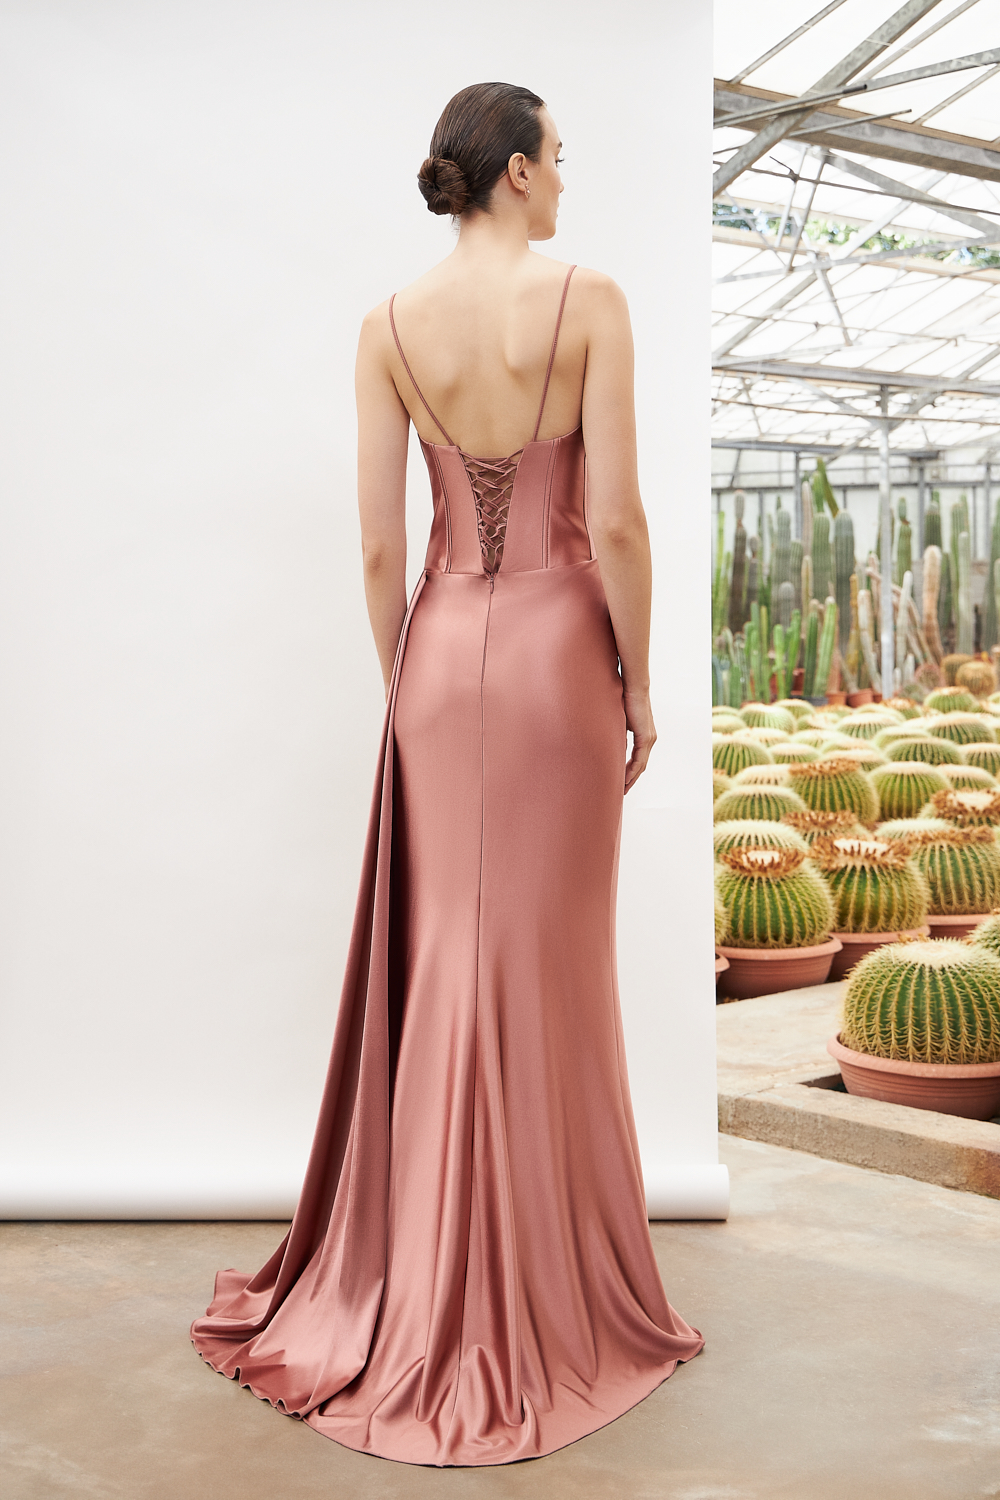 Cocktail Dresses / Long cocktail satin dress with open back